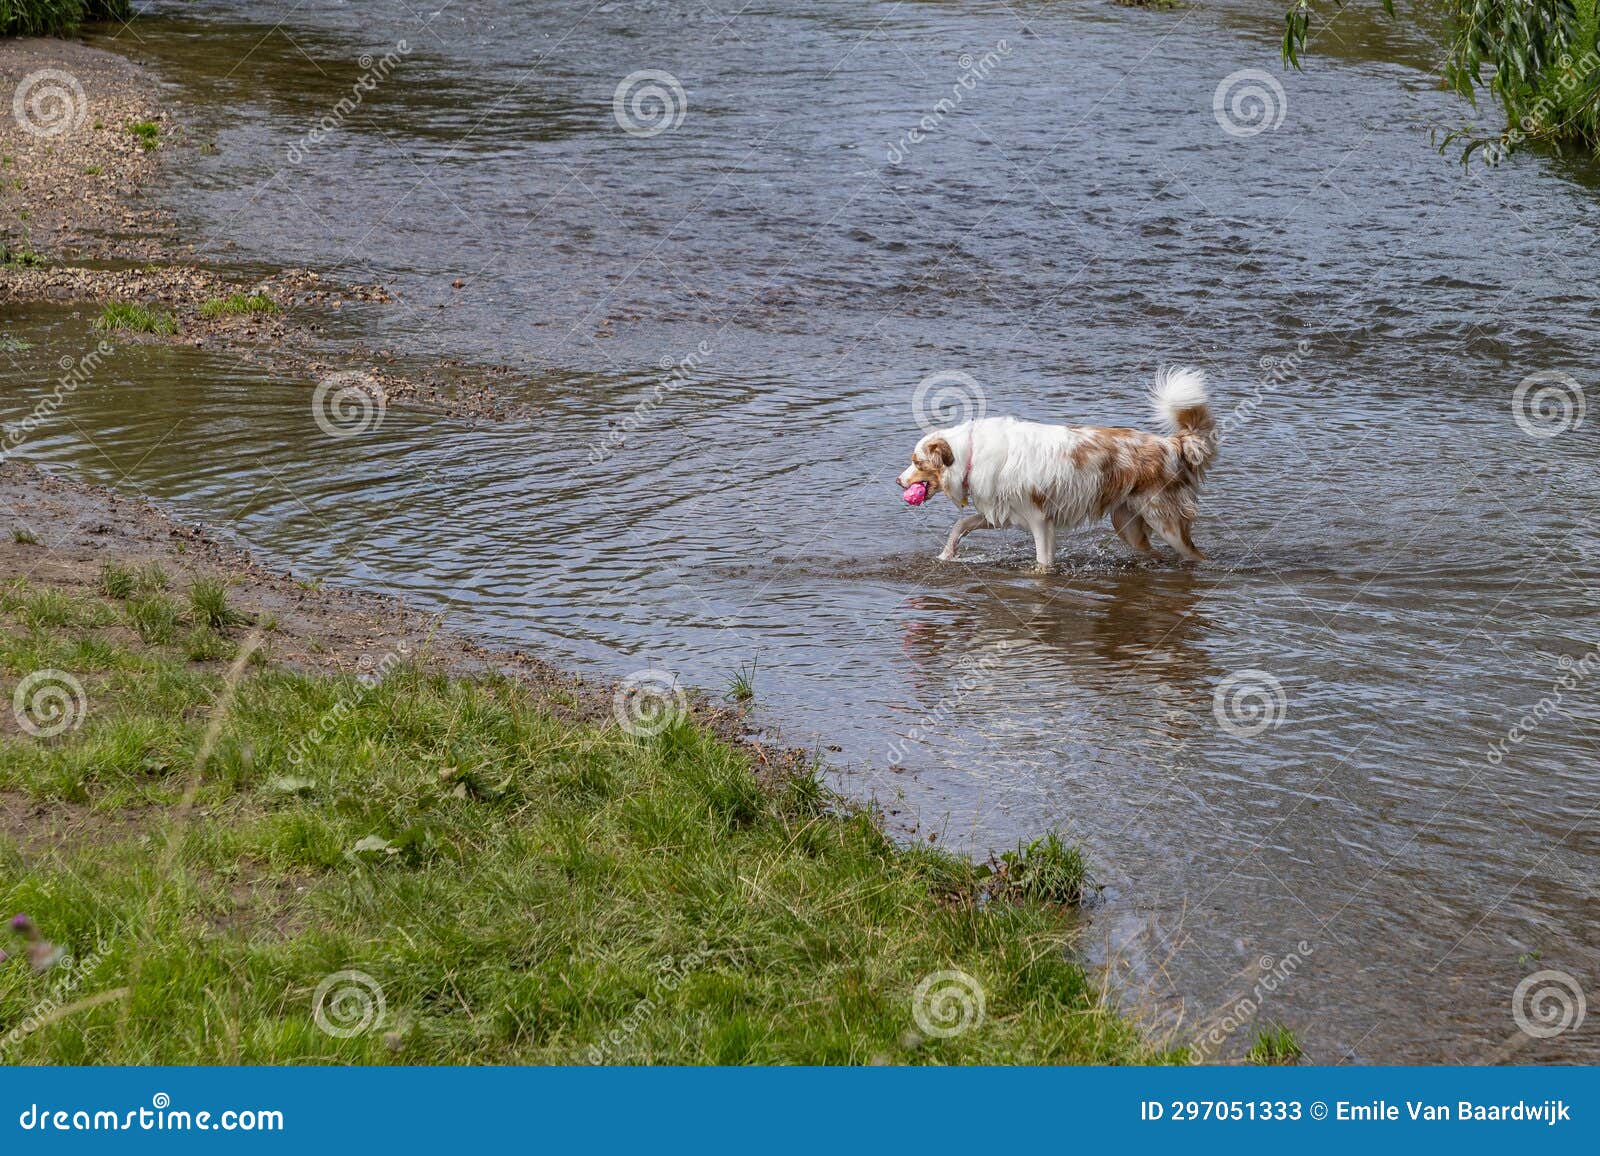 medium breed dog with abundant white brown fur walking out of river towards shore